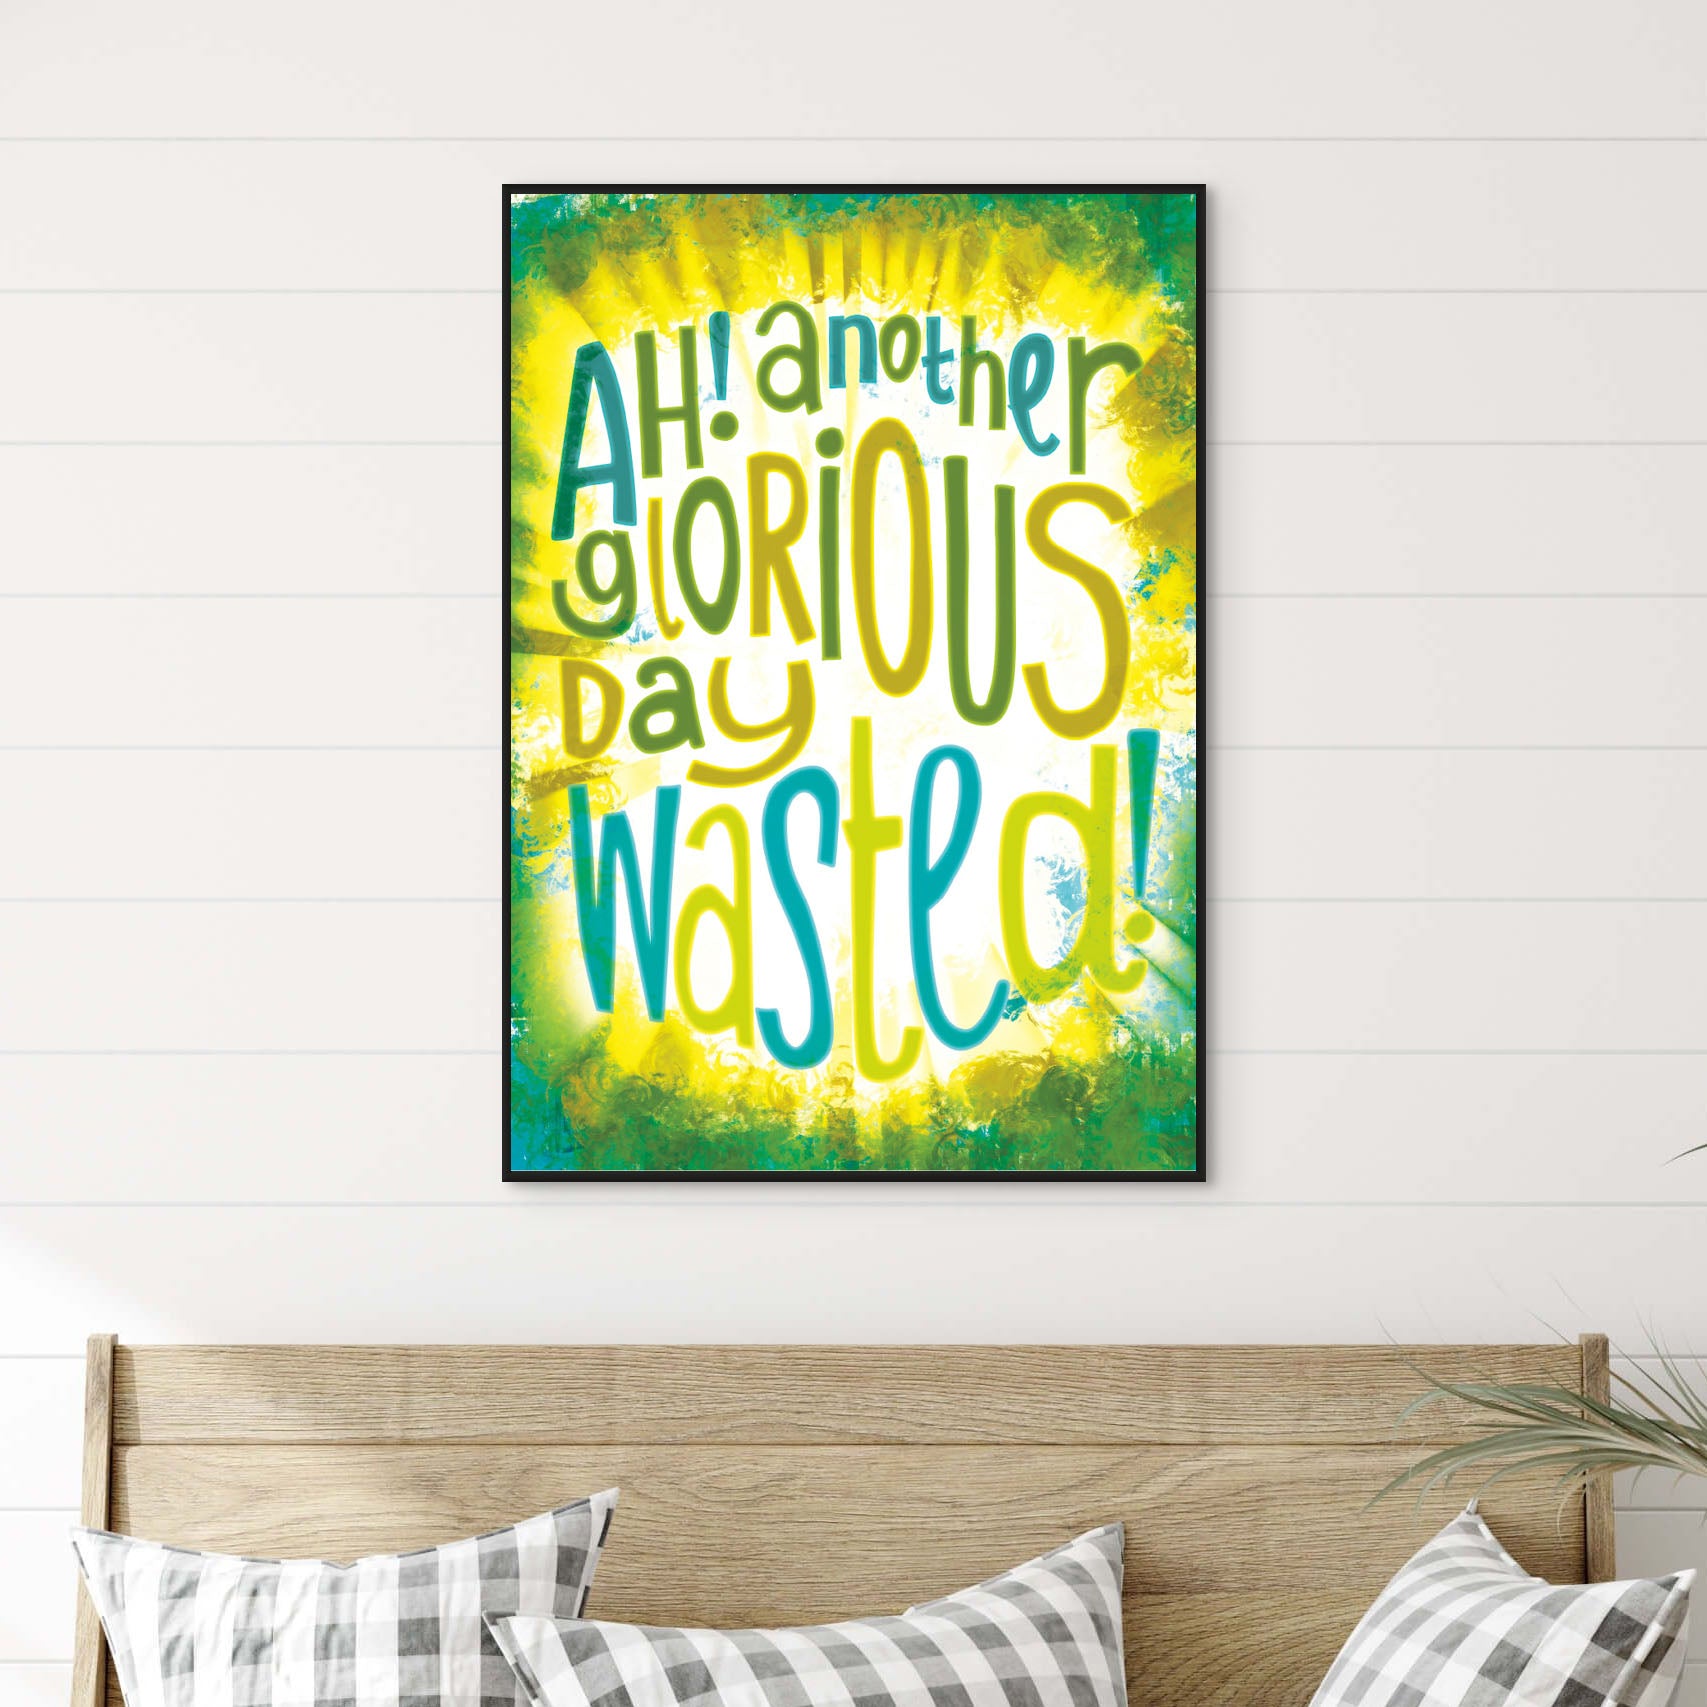 Another Glorious Day Wasted! Art Print